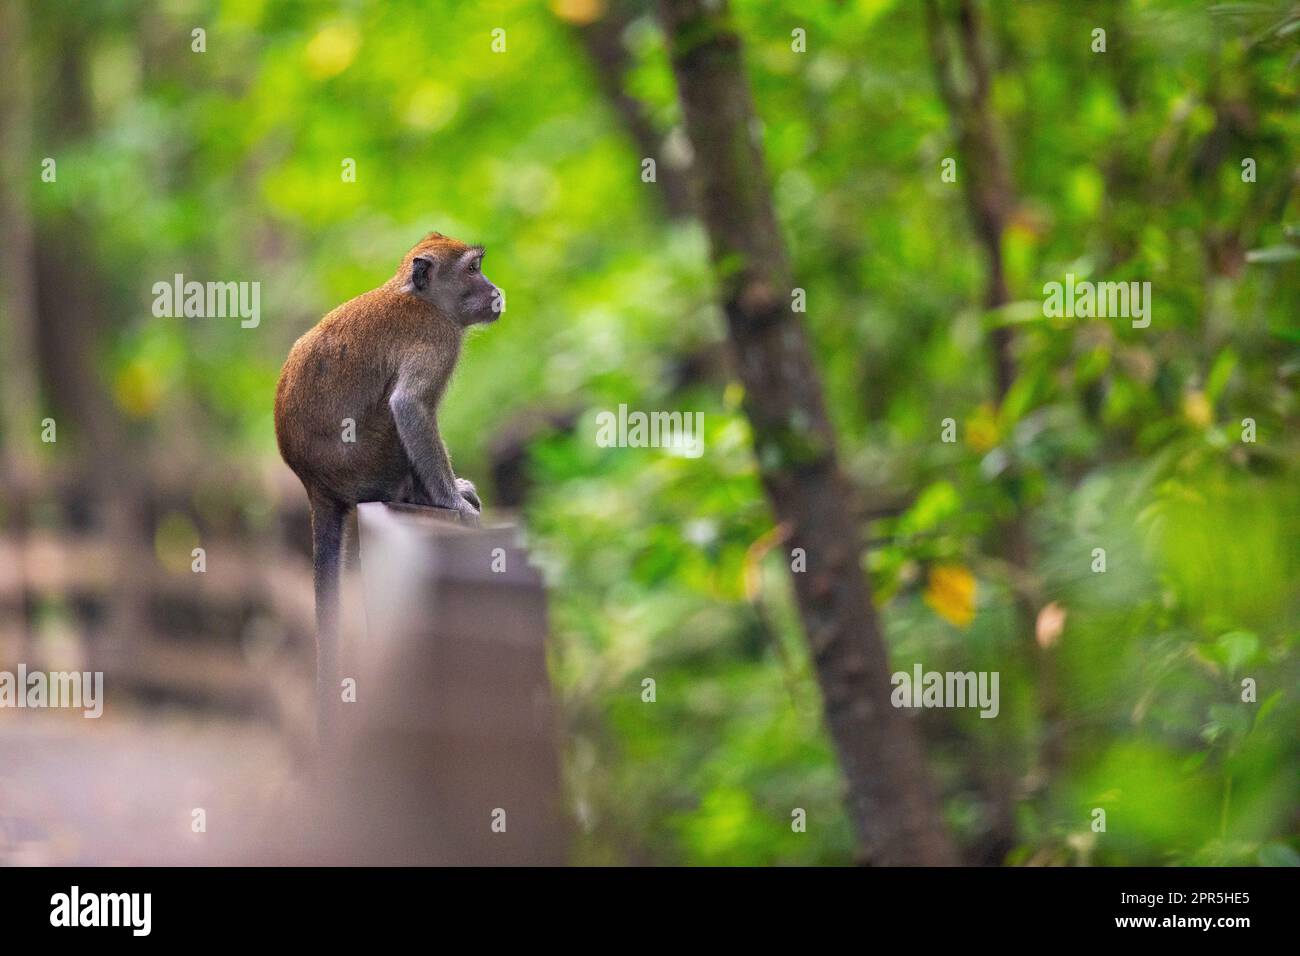 Long tailed macaque sitting on a boardwalk balustrade above a mangrove river, Singapore Stock Photo